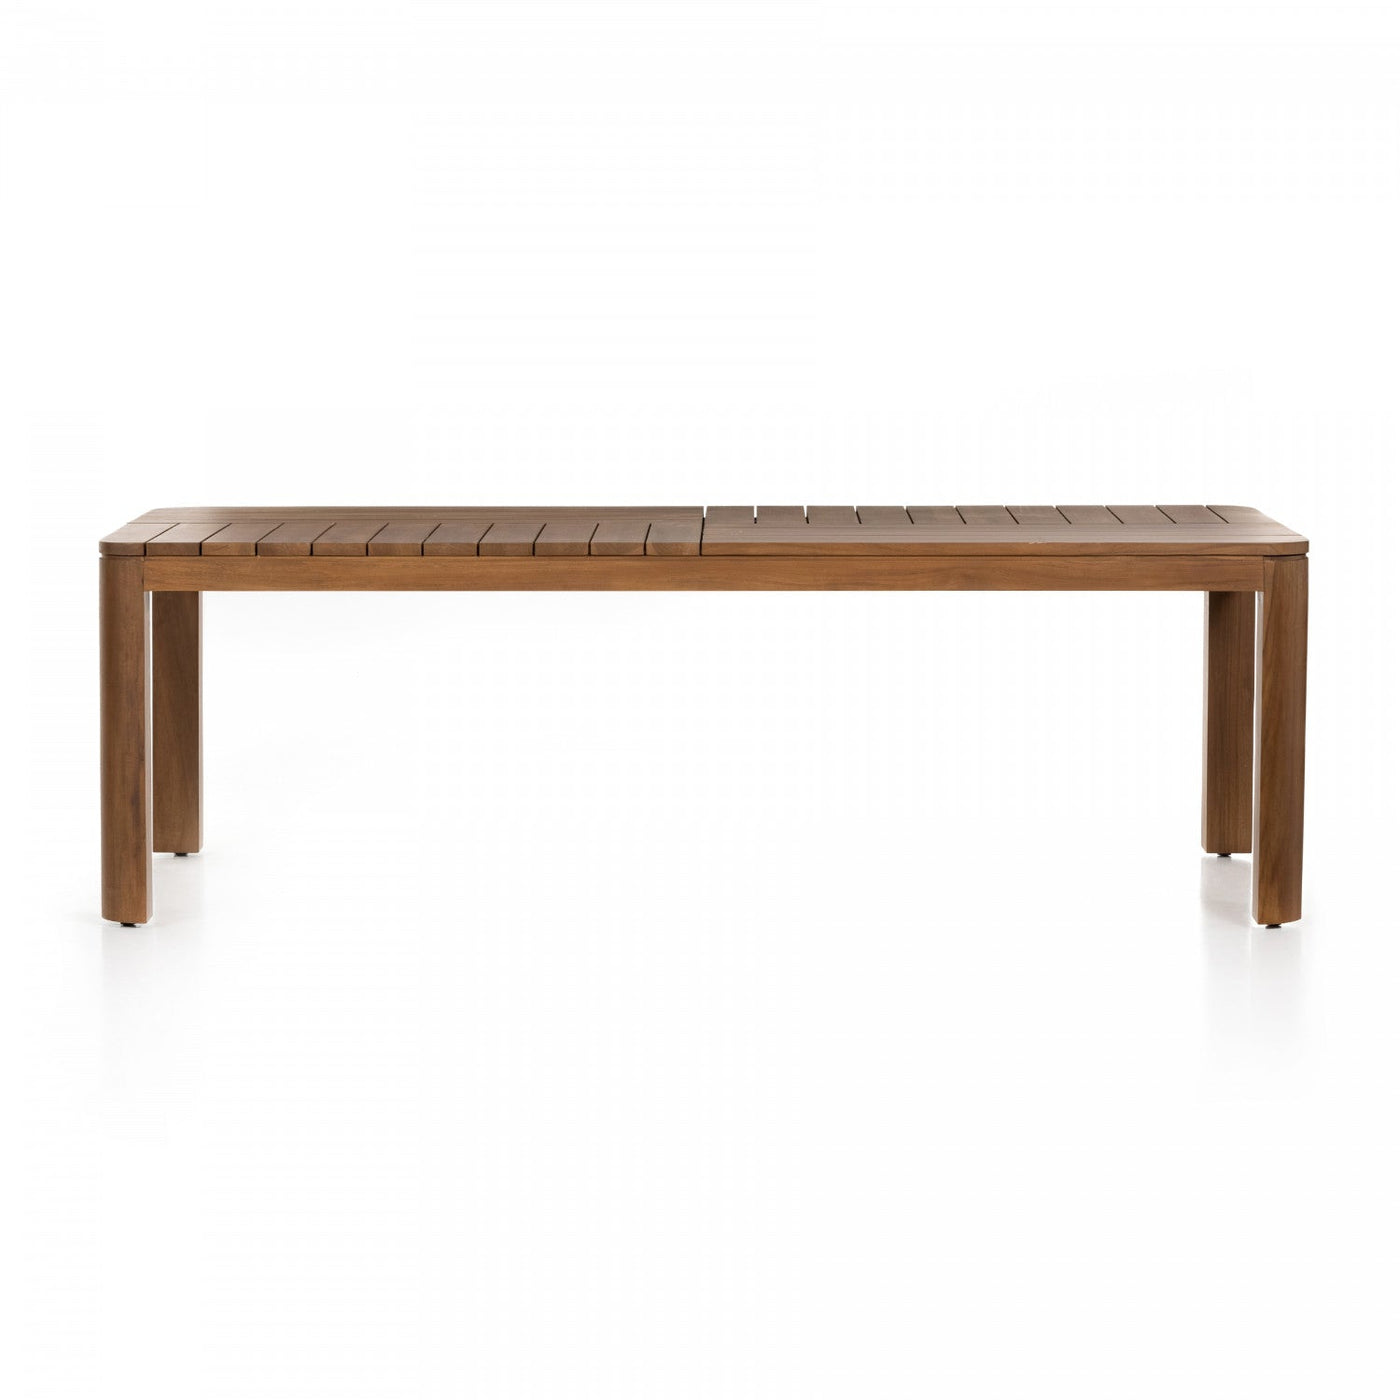 CULVER OUTDOOR DINING TABLE-94"-NATURAL